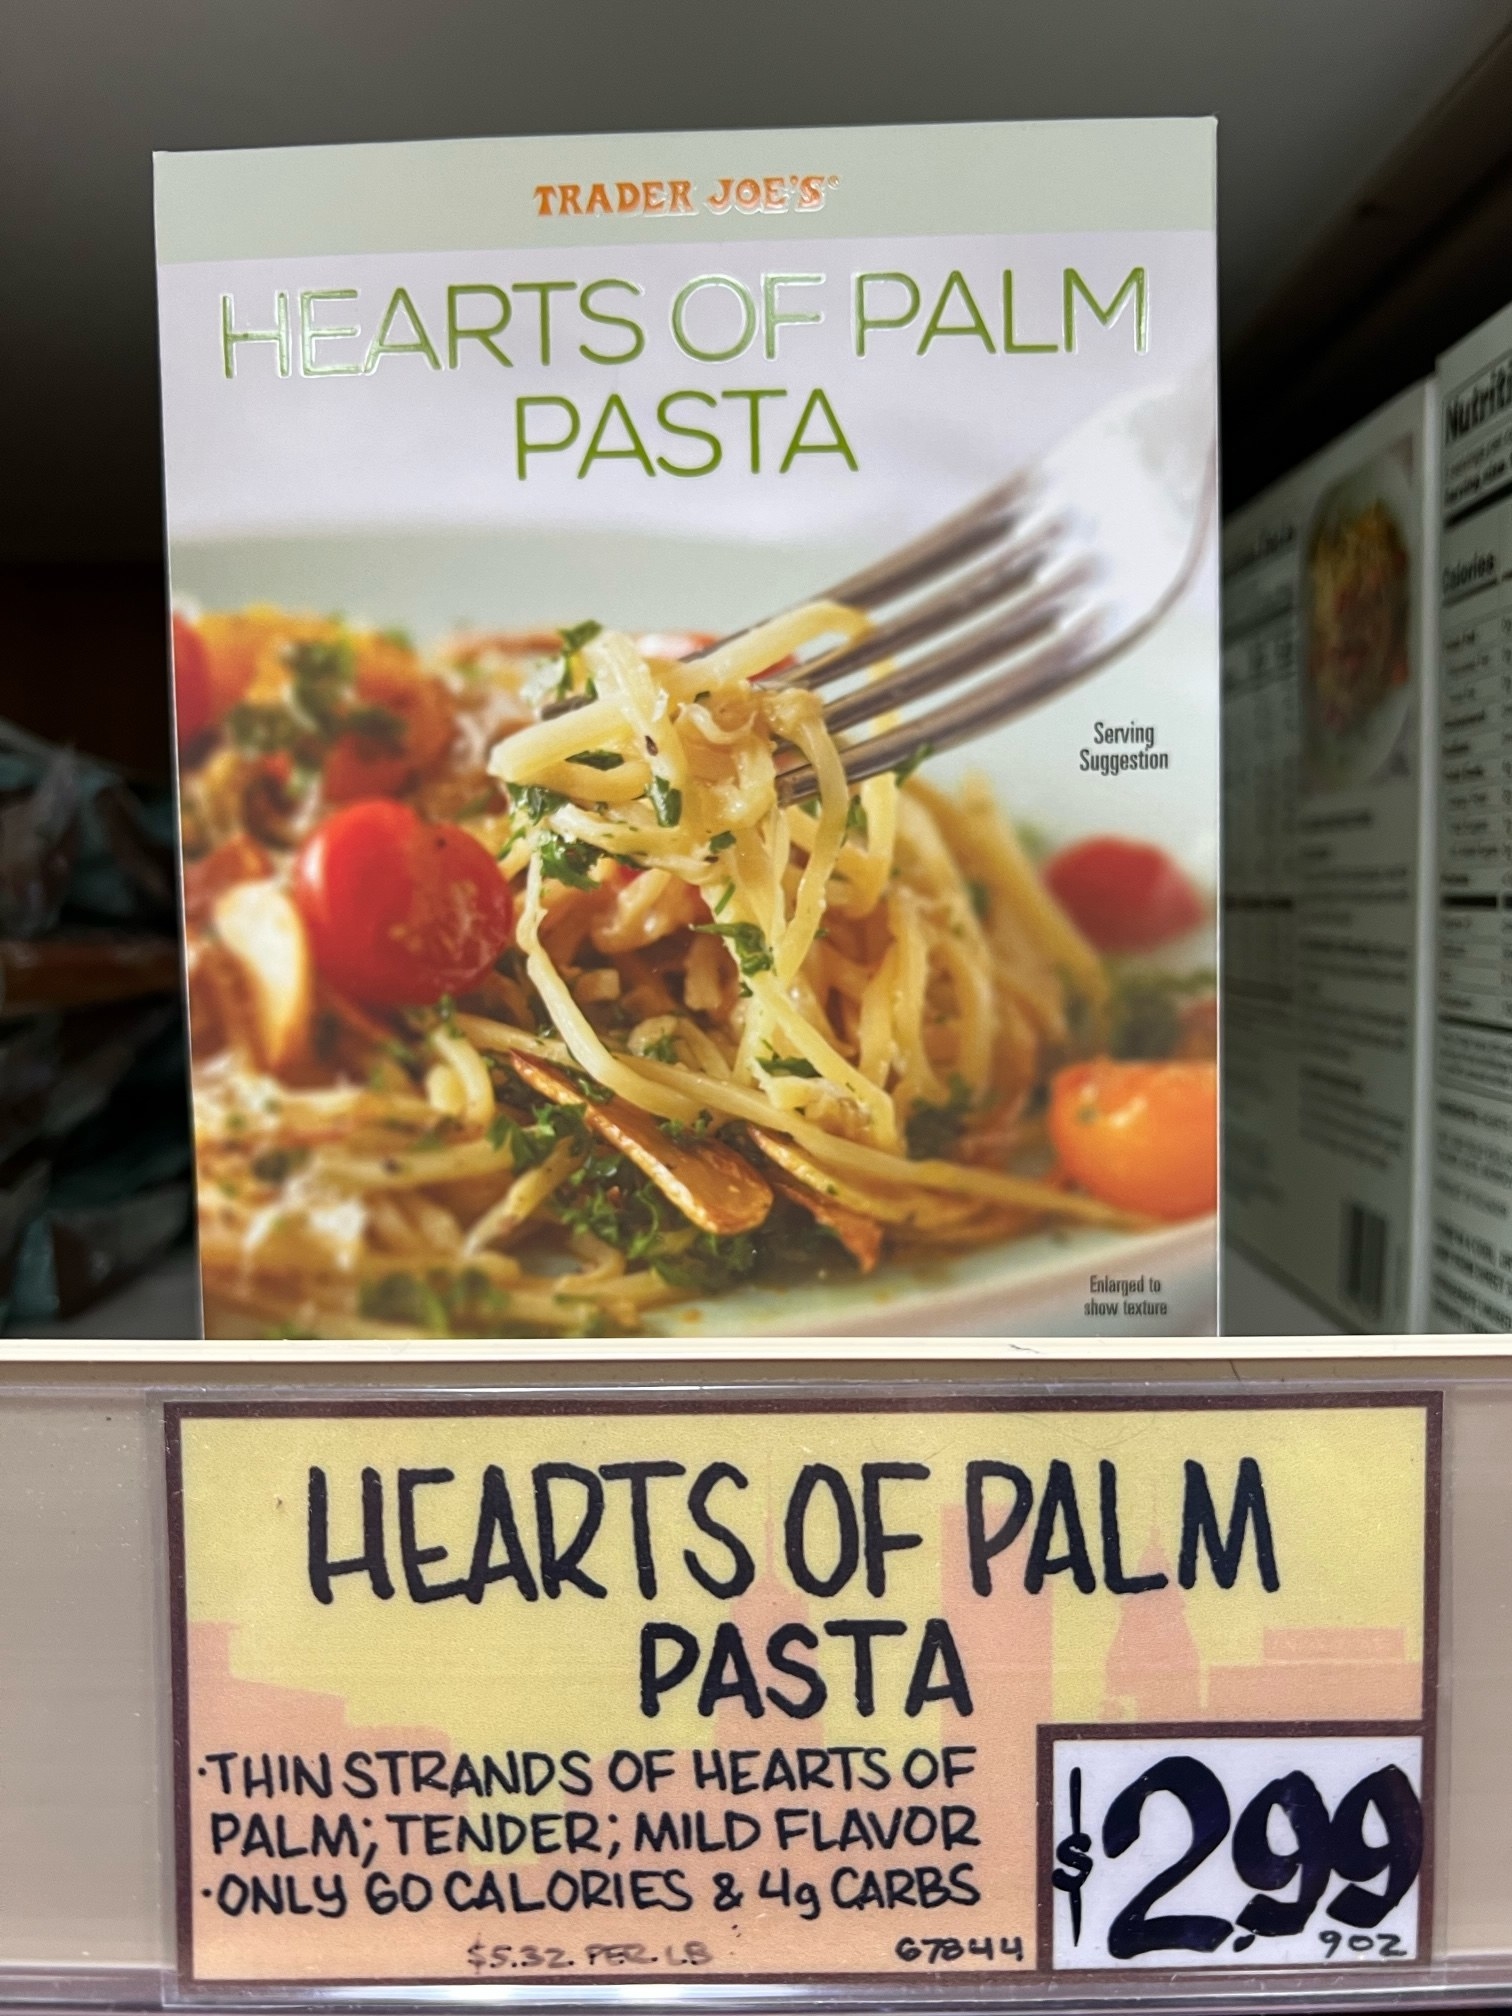 A box of hearts of palm pasta.